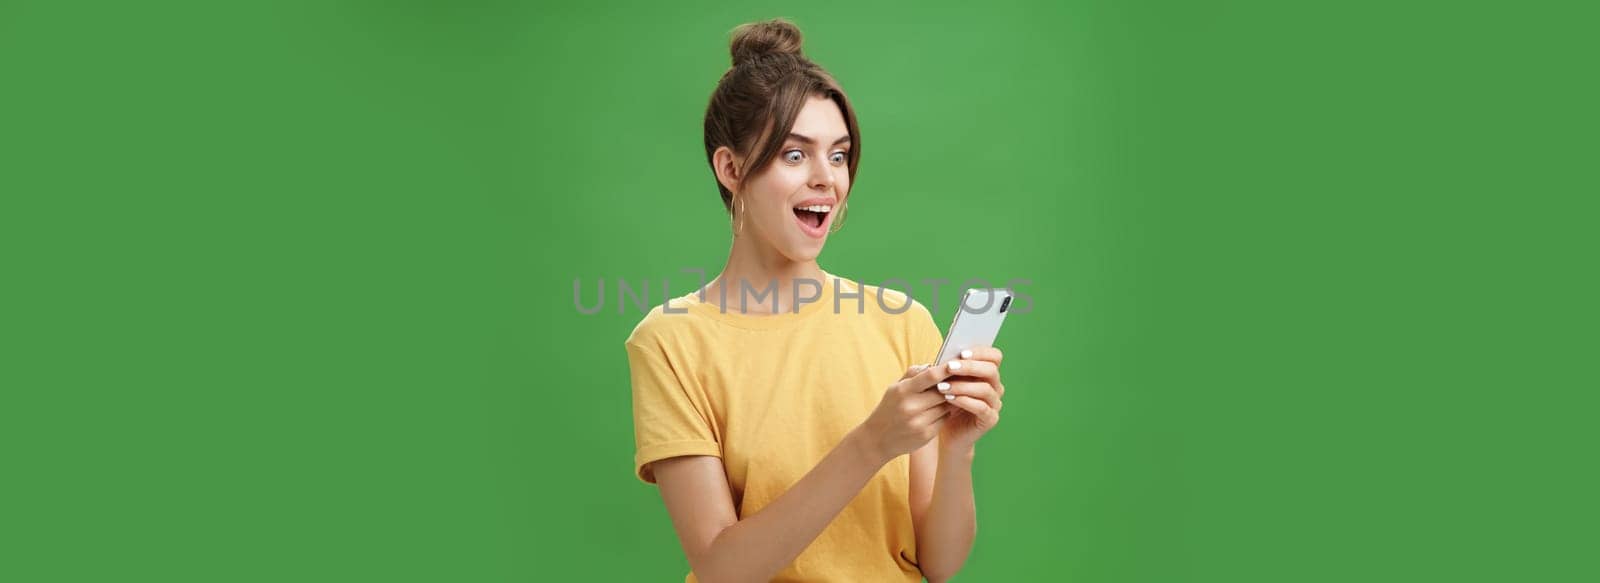 Woman reading surprising satisfying message in smartphone opening mouth from excitement, smiling amazed looking astonished at cellphone screen posing against green background in casual yellow t-shirt. Technology concept